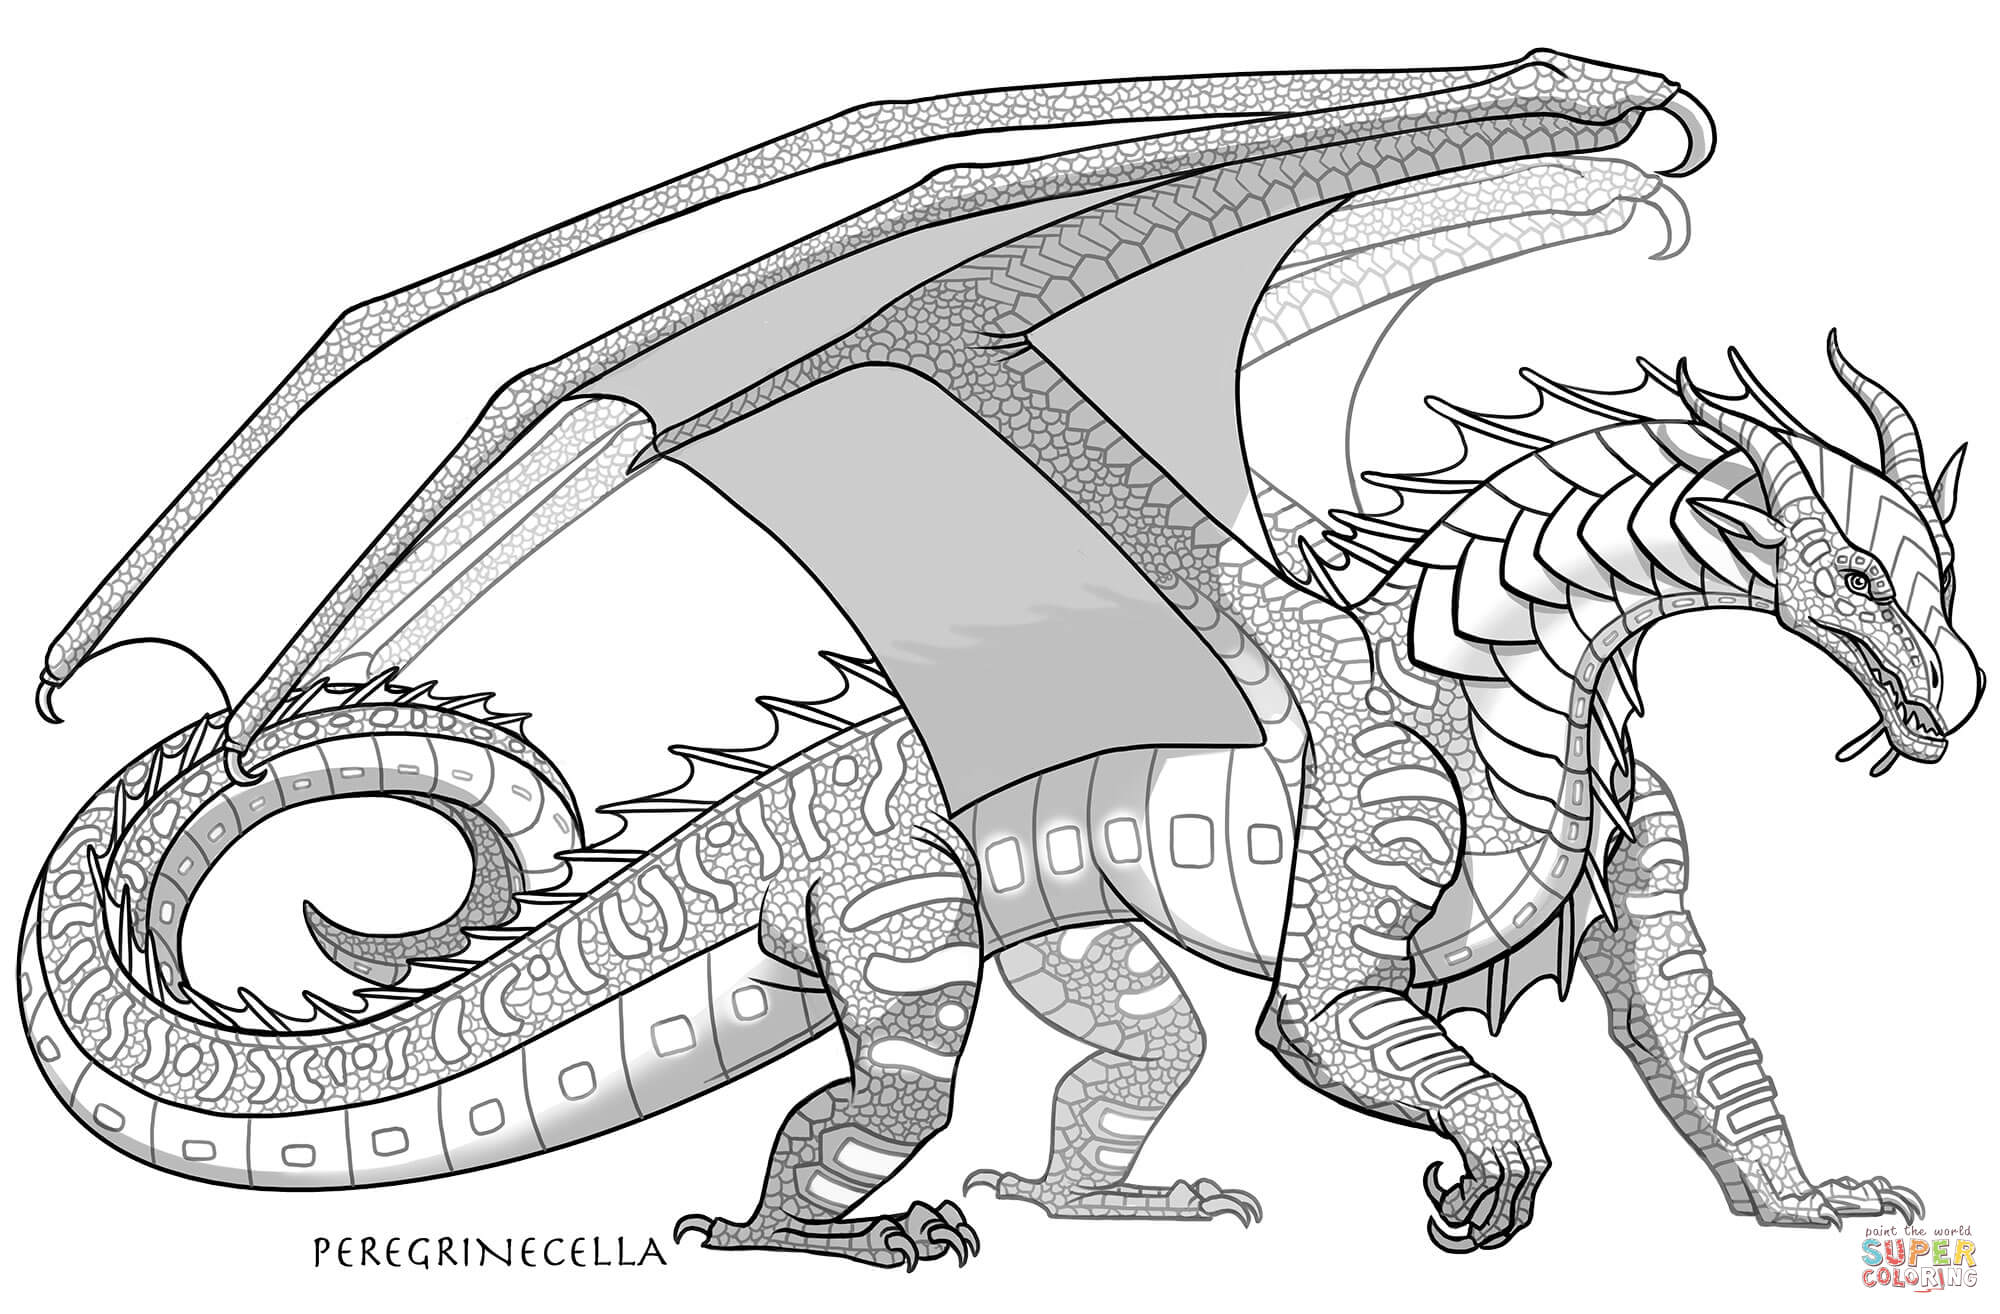 Seawing dragon coloring page free printable coloring pages